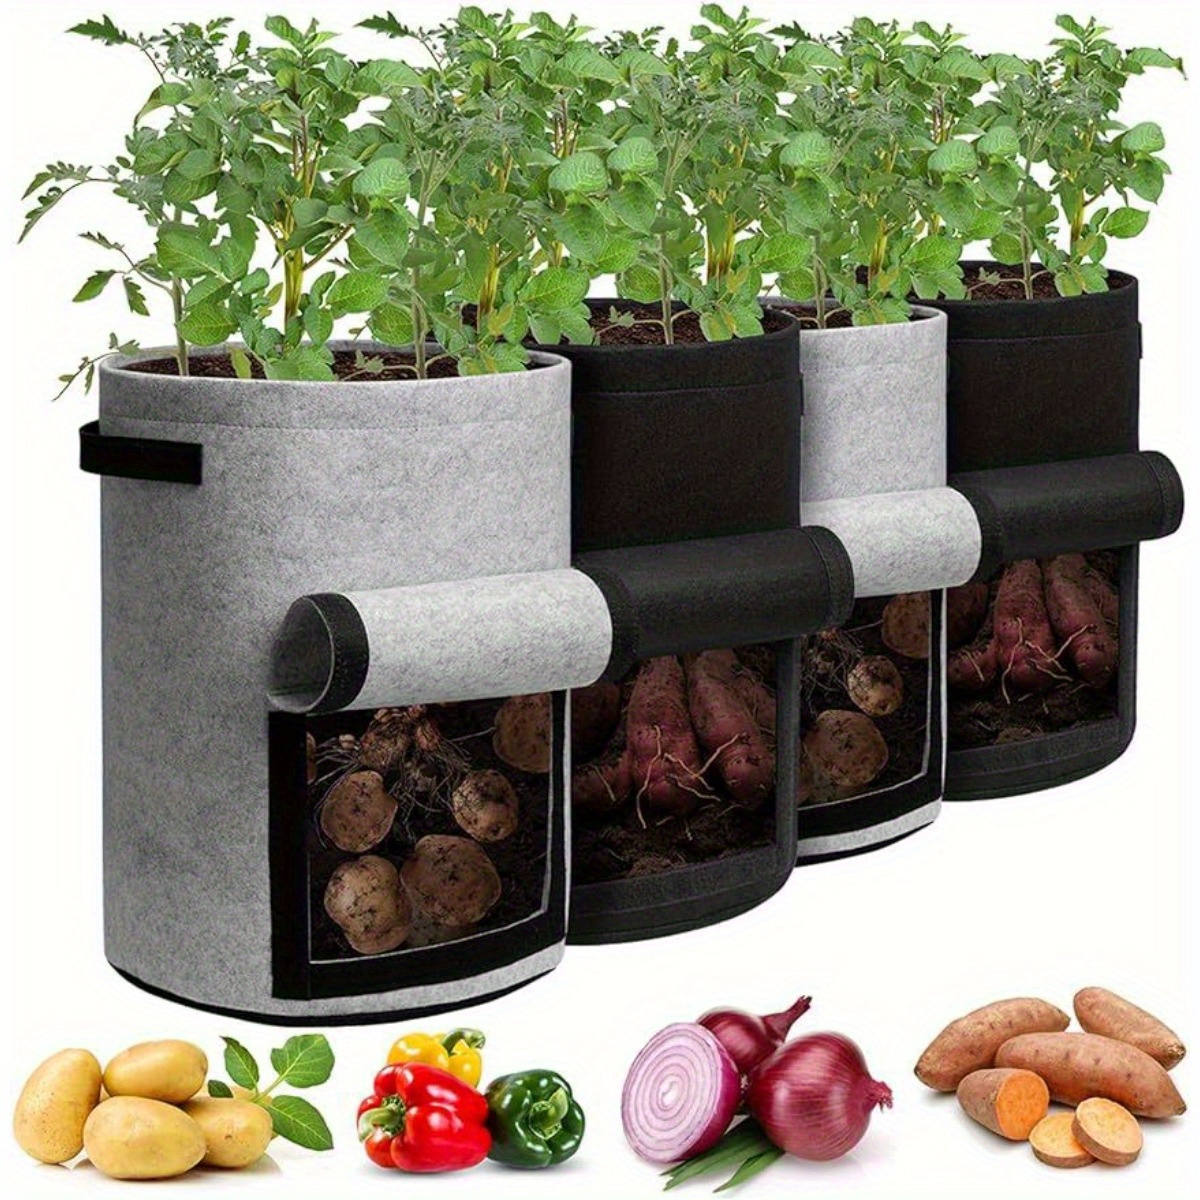 

4 Packs, Potato Grow Bags With Flap 7 Gallon(approx. 25 Liters) 10 Gallon(approx. 35.7 Liters), Planter Pot With Handles And Harvest Window For Potato Tomato And Vegetables, Black And Gray